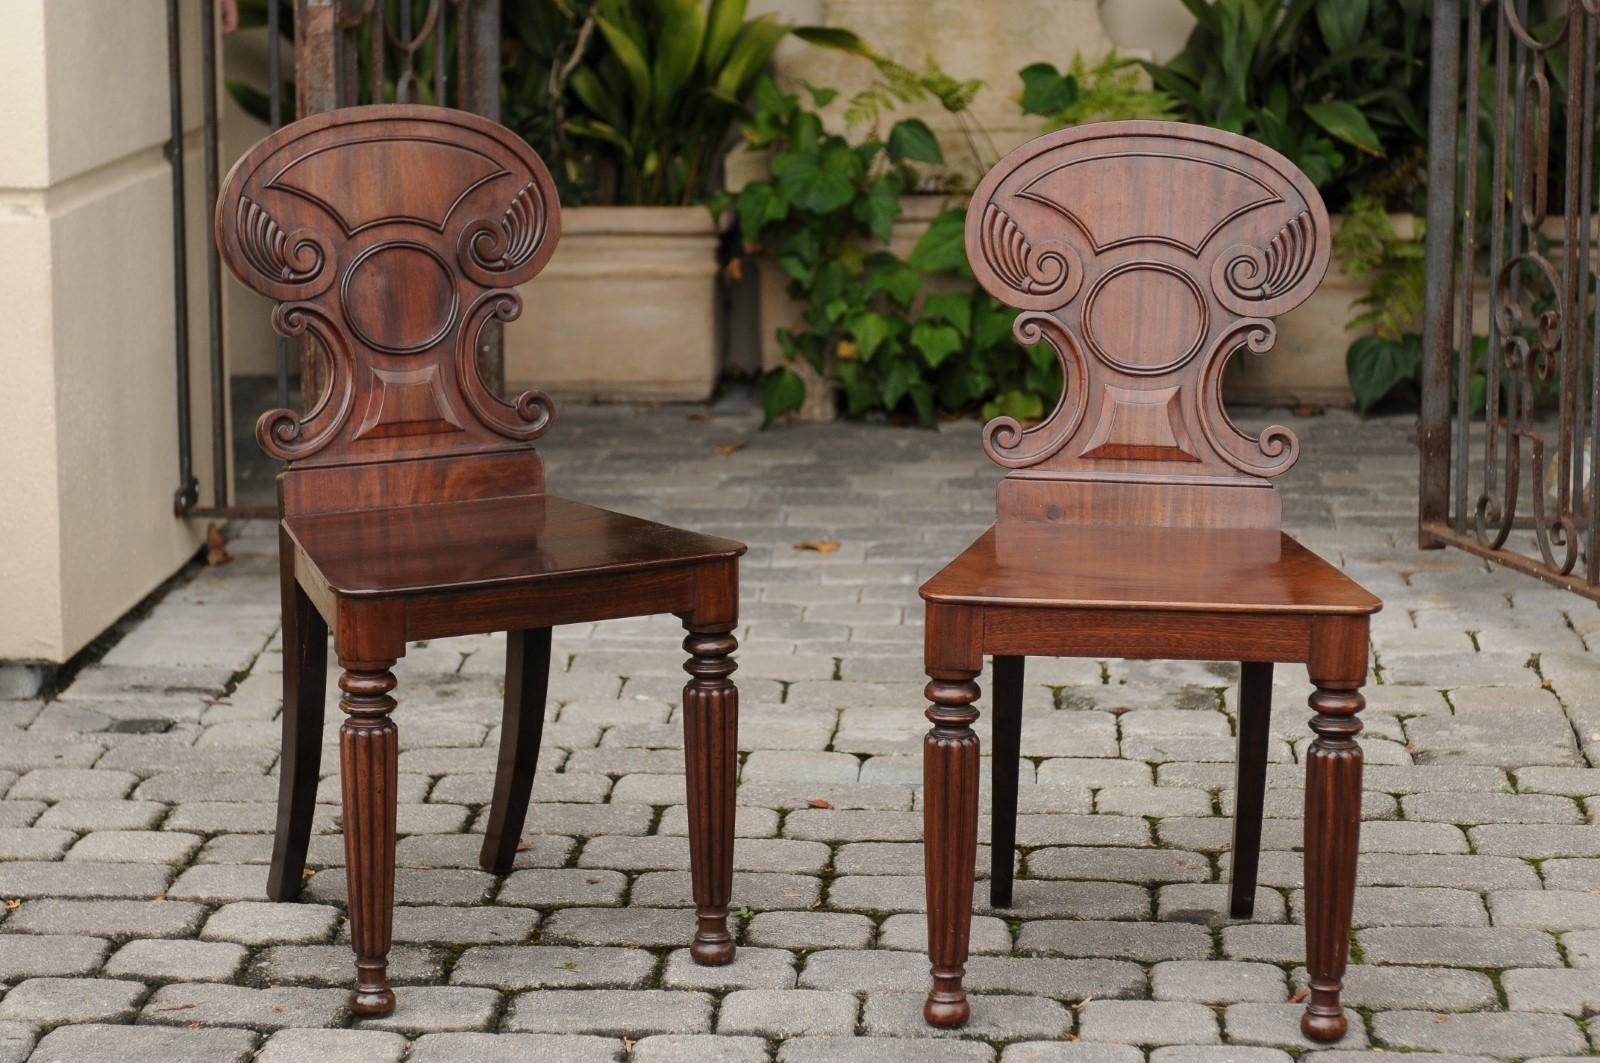 A pair of English Regency style mahogany hall chairs from the second half of the 19th century, with c-scroll carved backs, reeded and saber legs. Designed to be placed against the wall in main halls to accommodate guests waiting to be received, hall